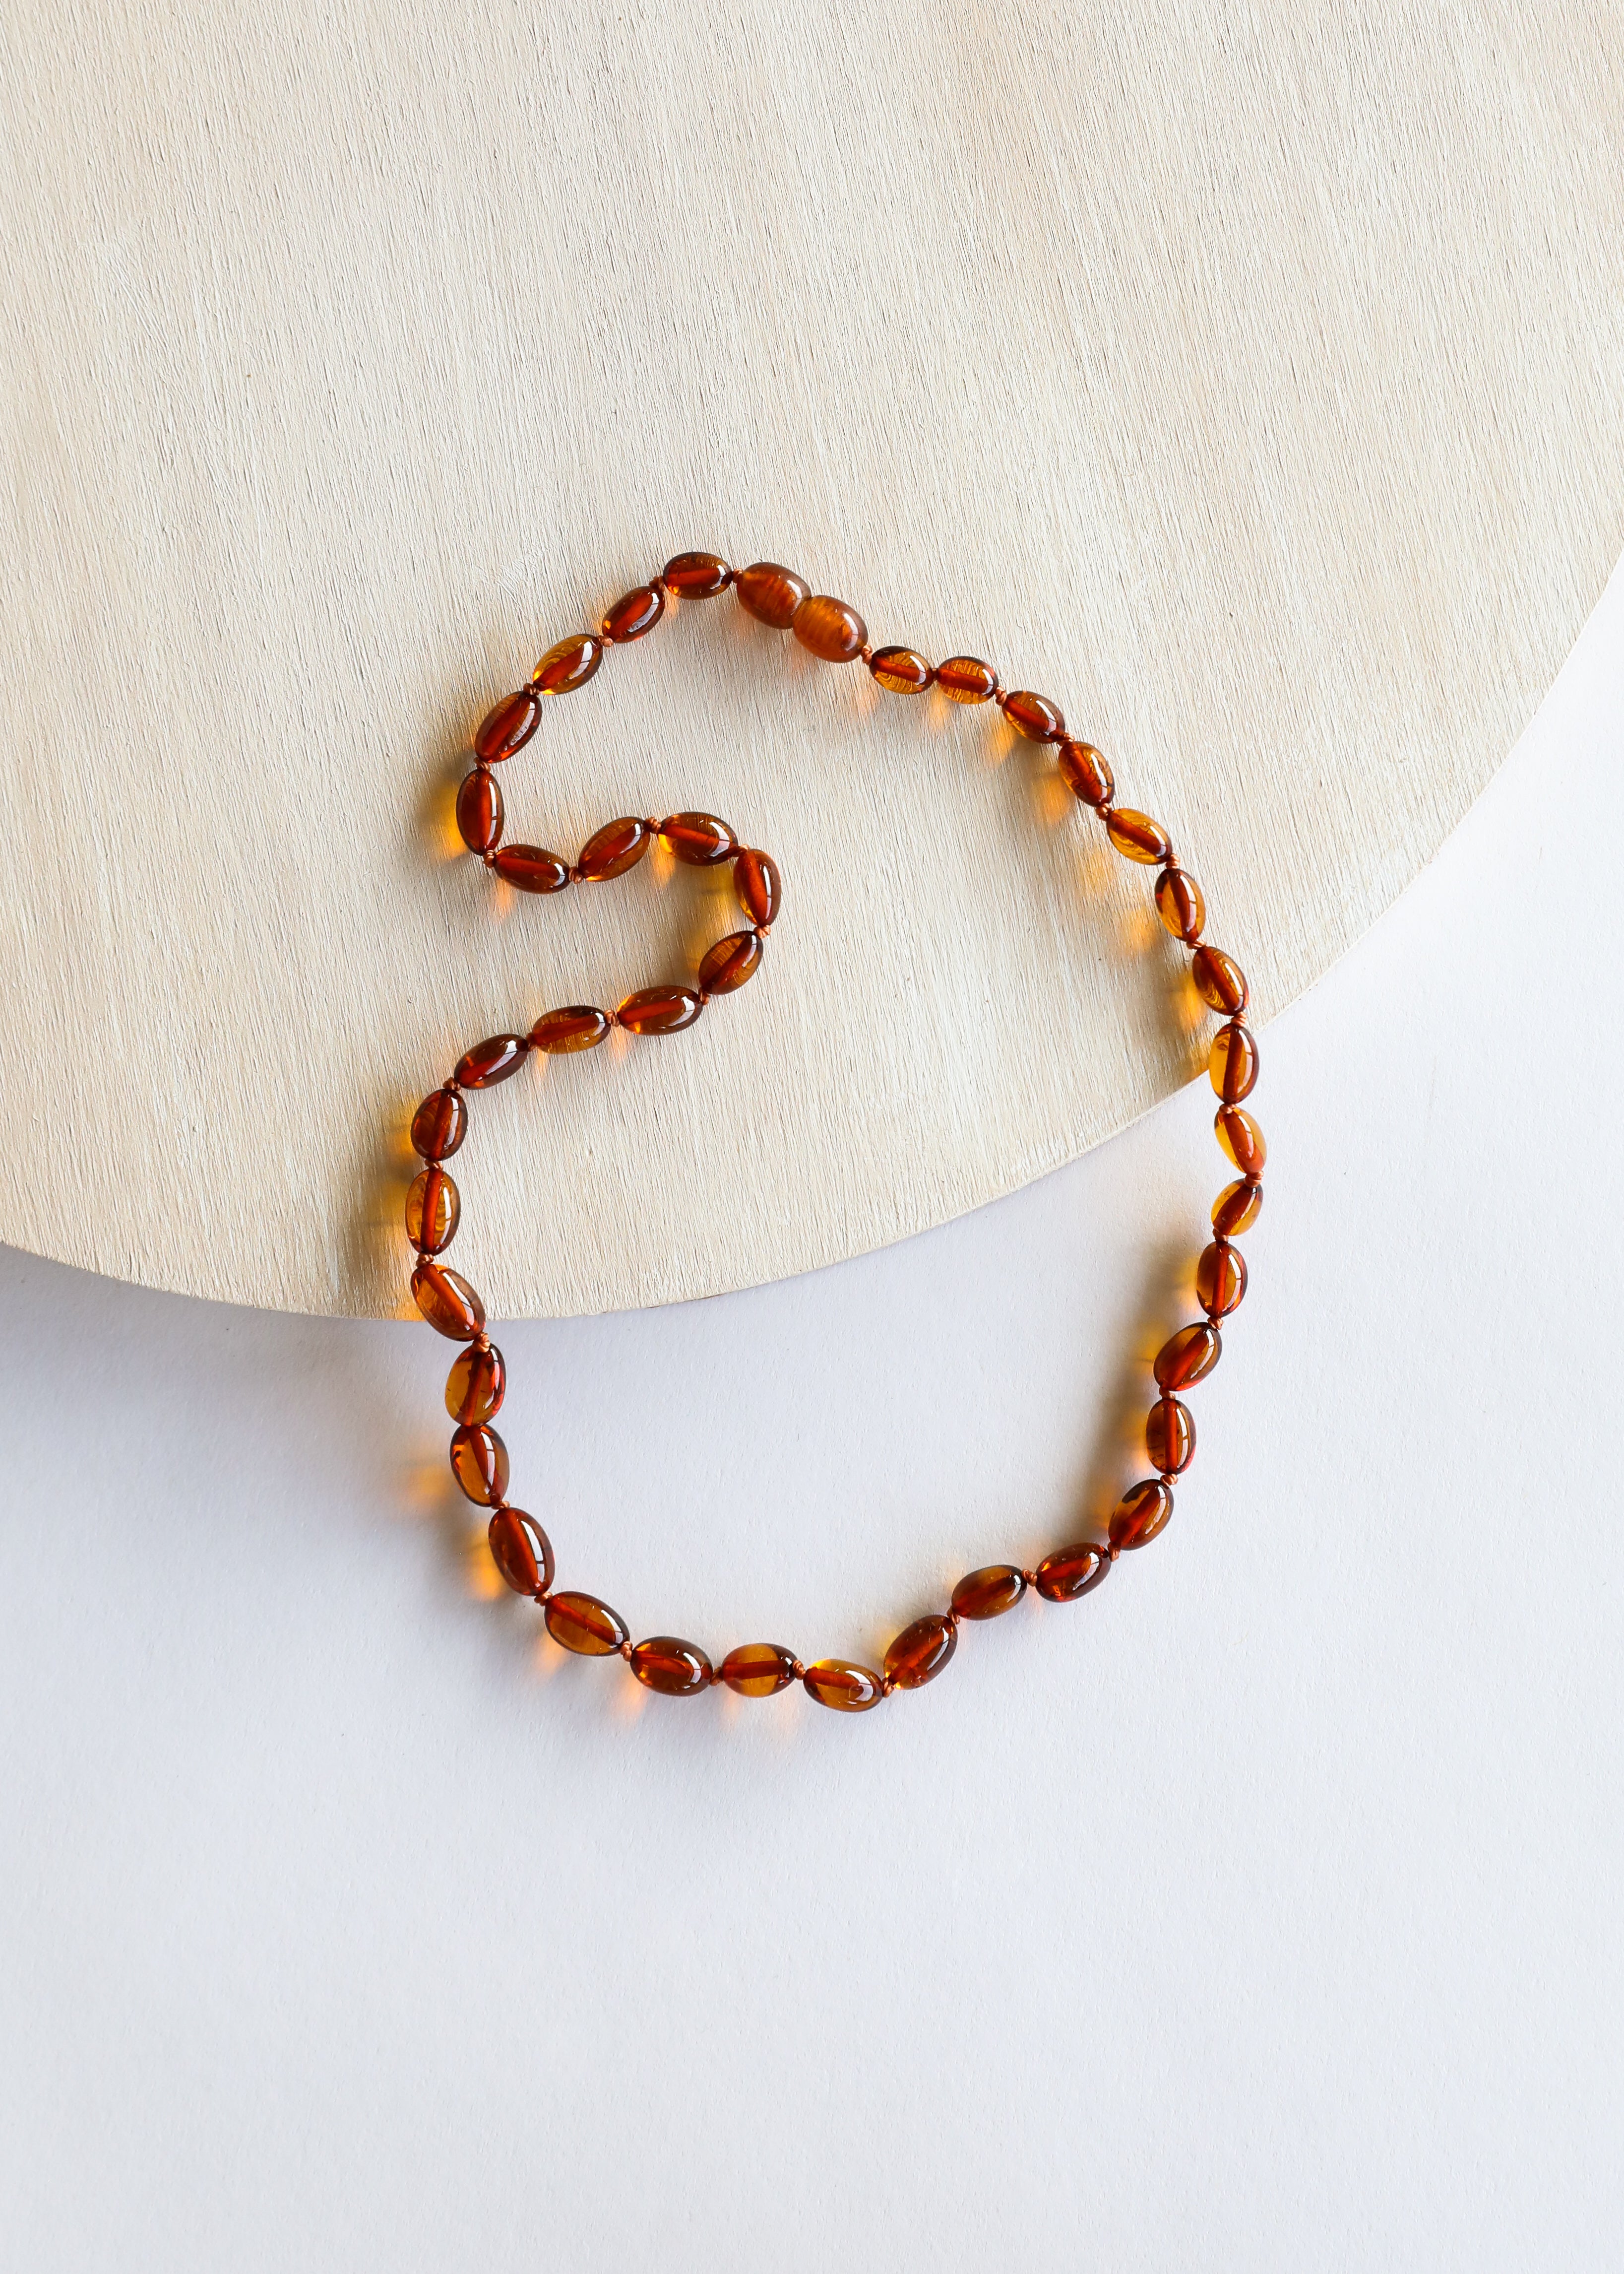 Genuine Baltic Amber Necklace - Amber Jewelry for women pressed – Lithuania- Amber